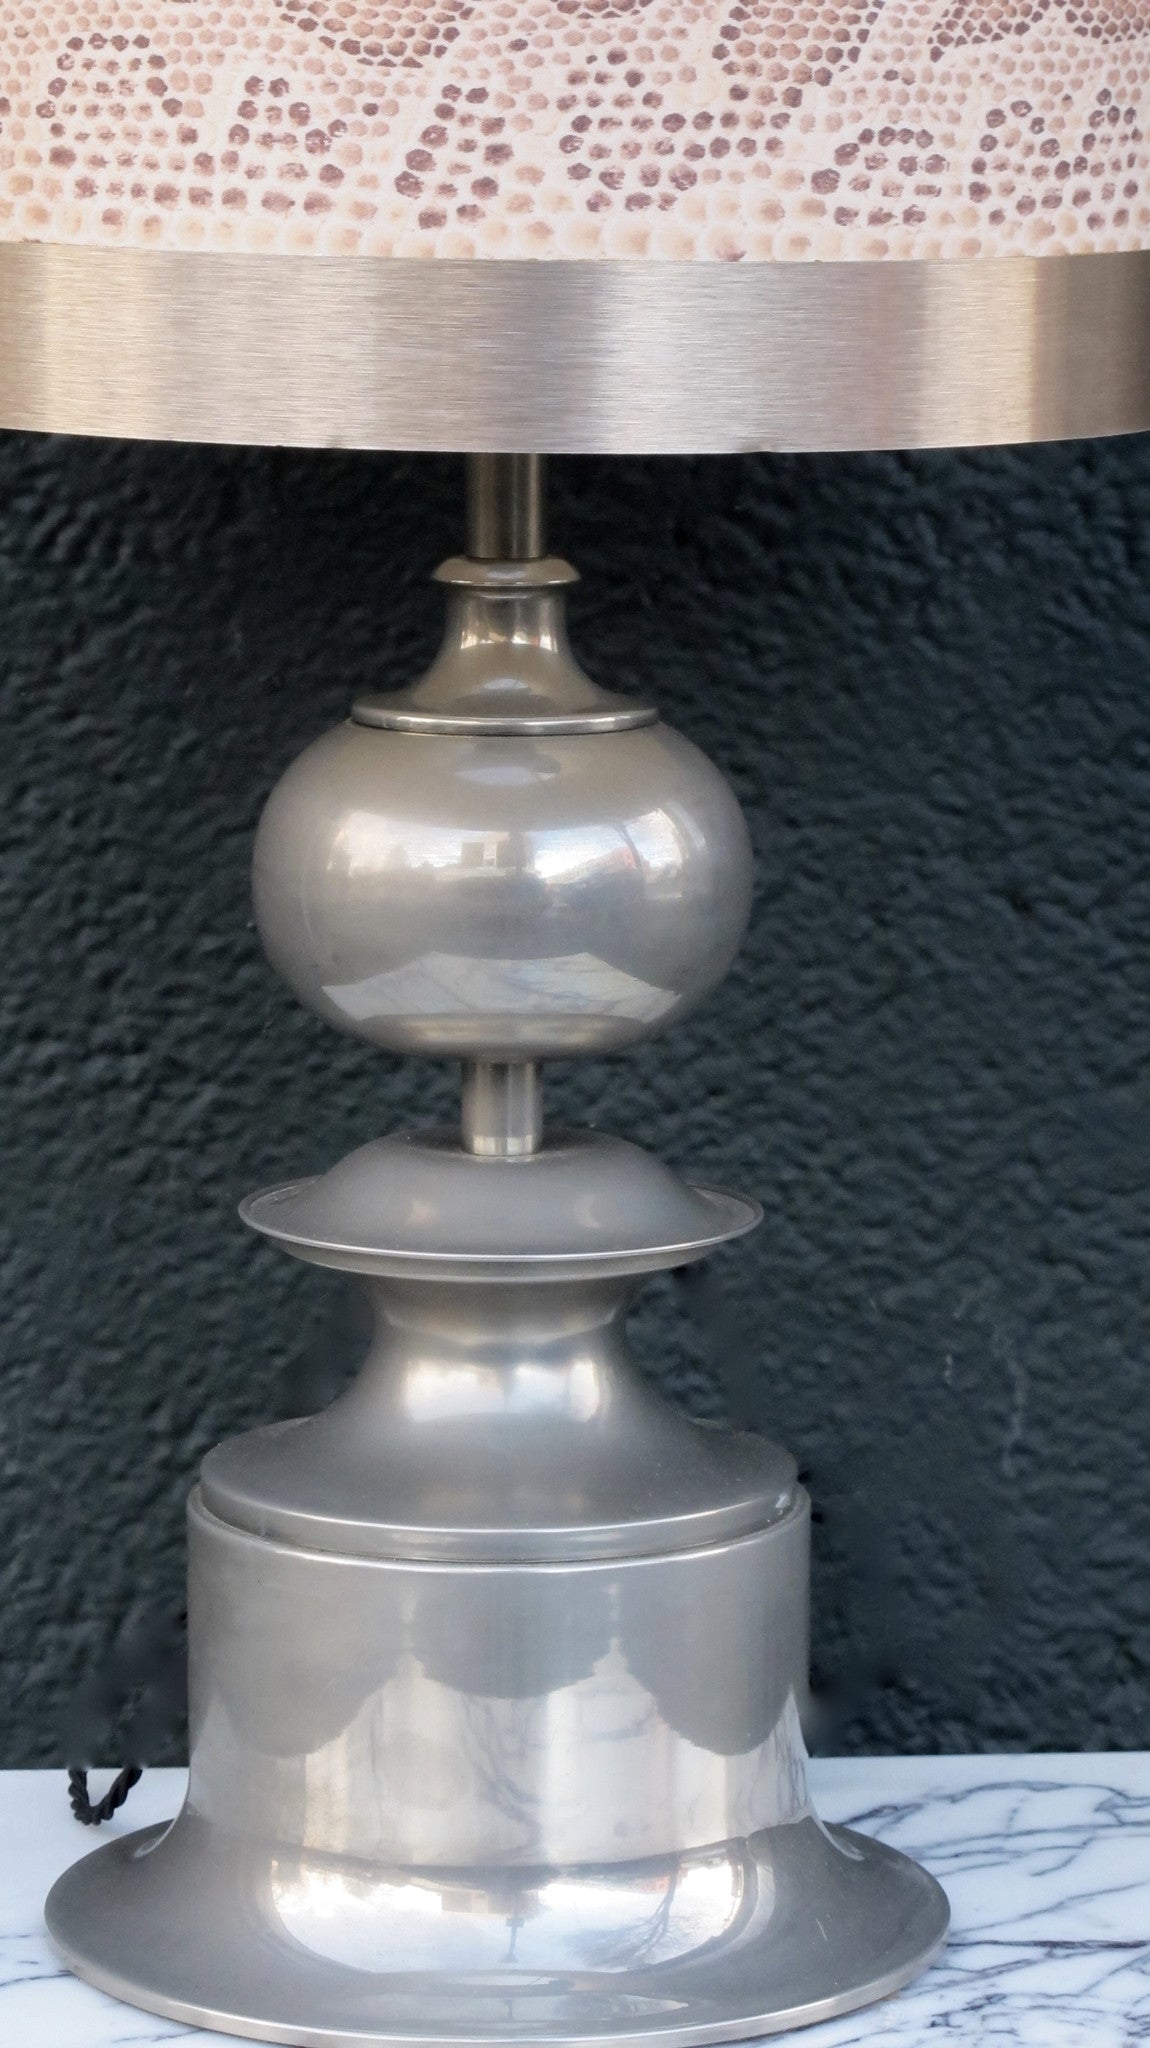 Fabulous 1970s Italian pewter table lamp with original faux snakeskin shade.